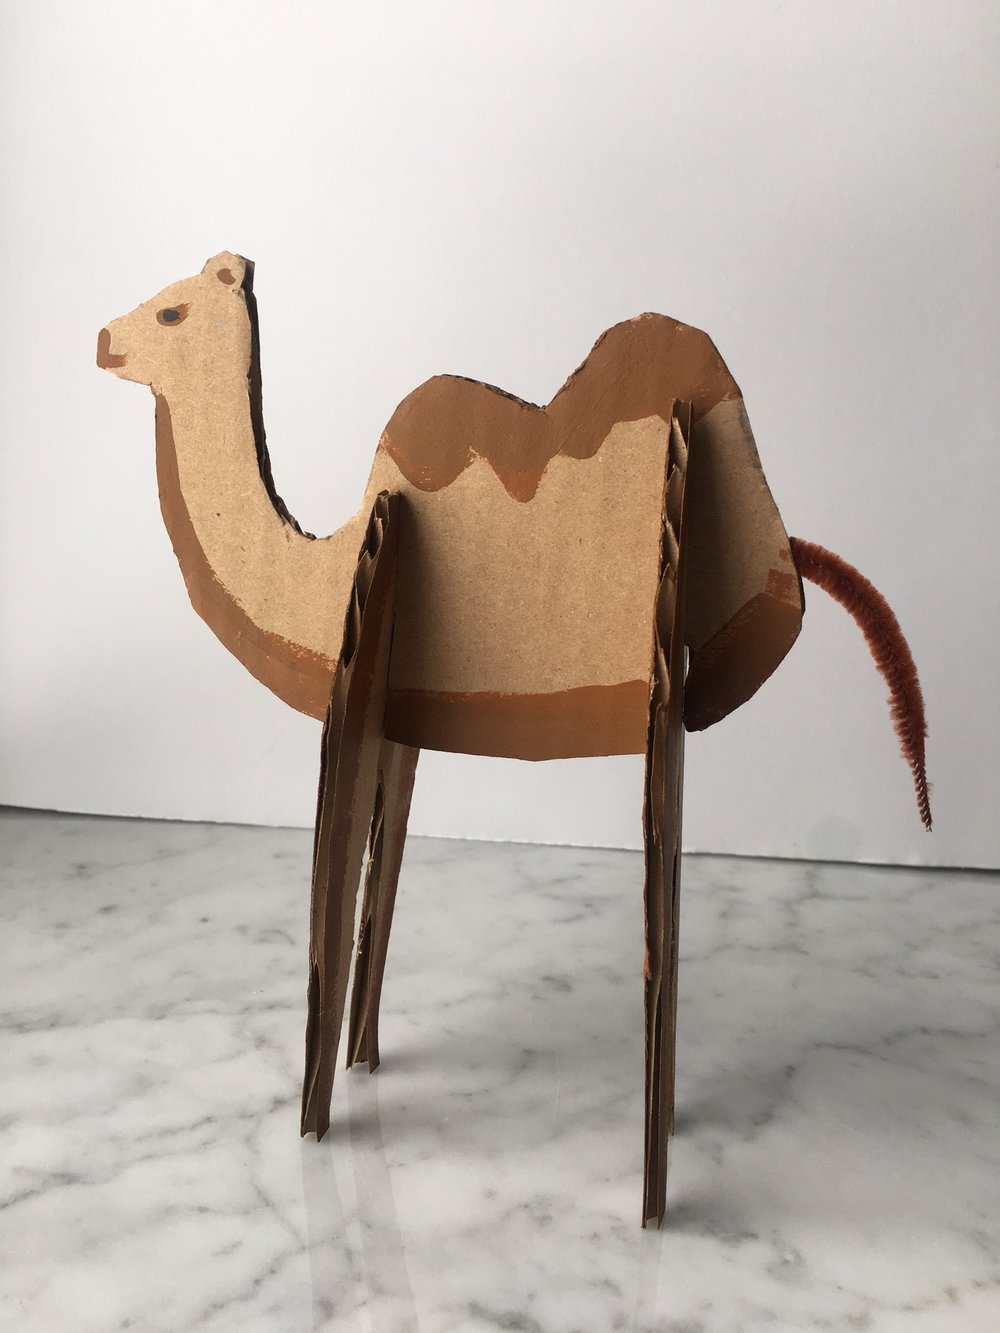 Recycled Cardboard Zoo Animals! — super make it